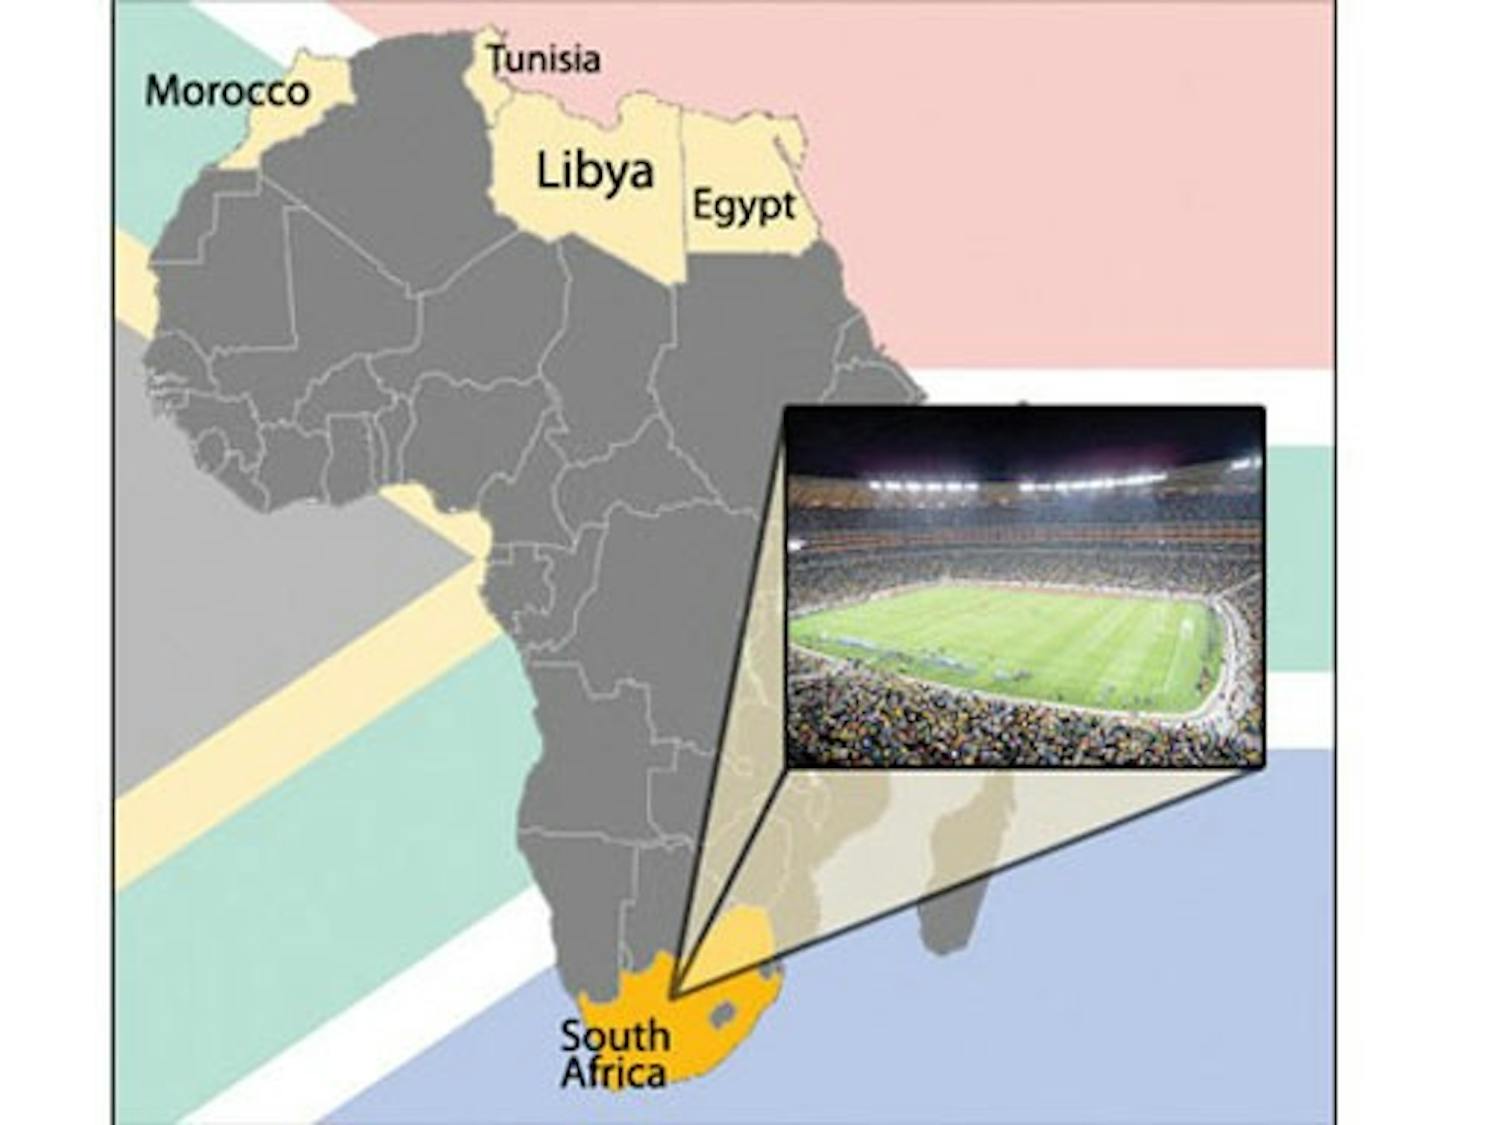 Out of the five countries who originally submitted bids to host the 2010 World Cup, South Africa emerged victorious.